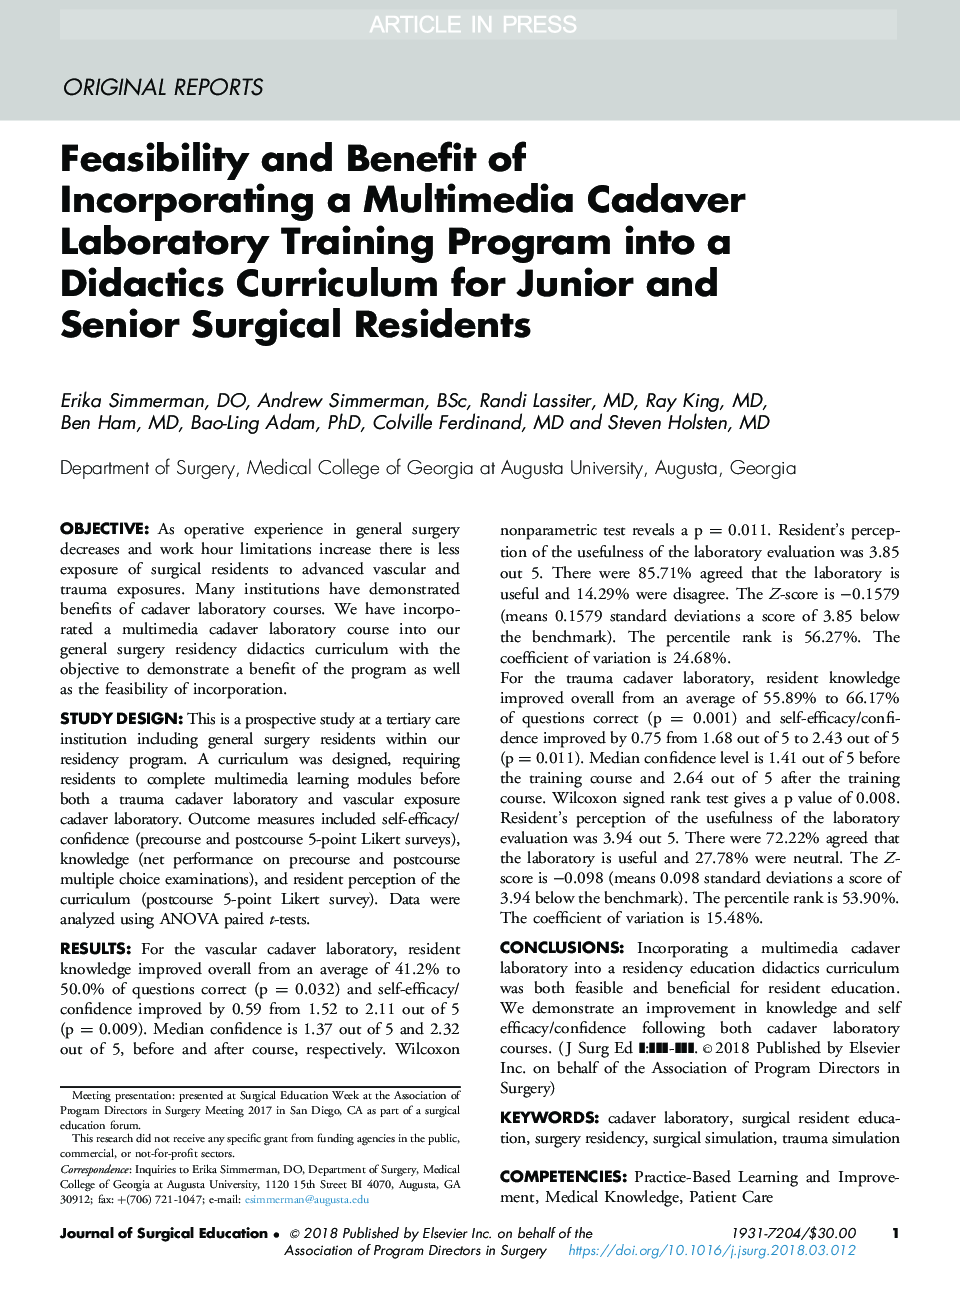 Feasibility and Benefit of Incorporating a Multimedia Cadaver Laboratory Training Program into a Didactics Curriculum for Junior and Senior Surgical Residents